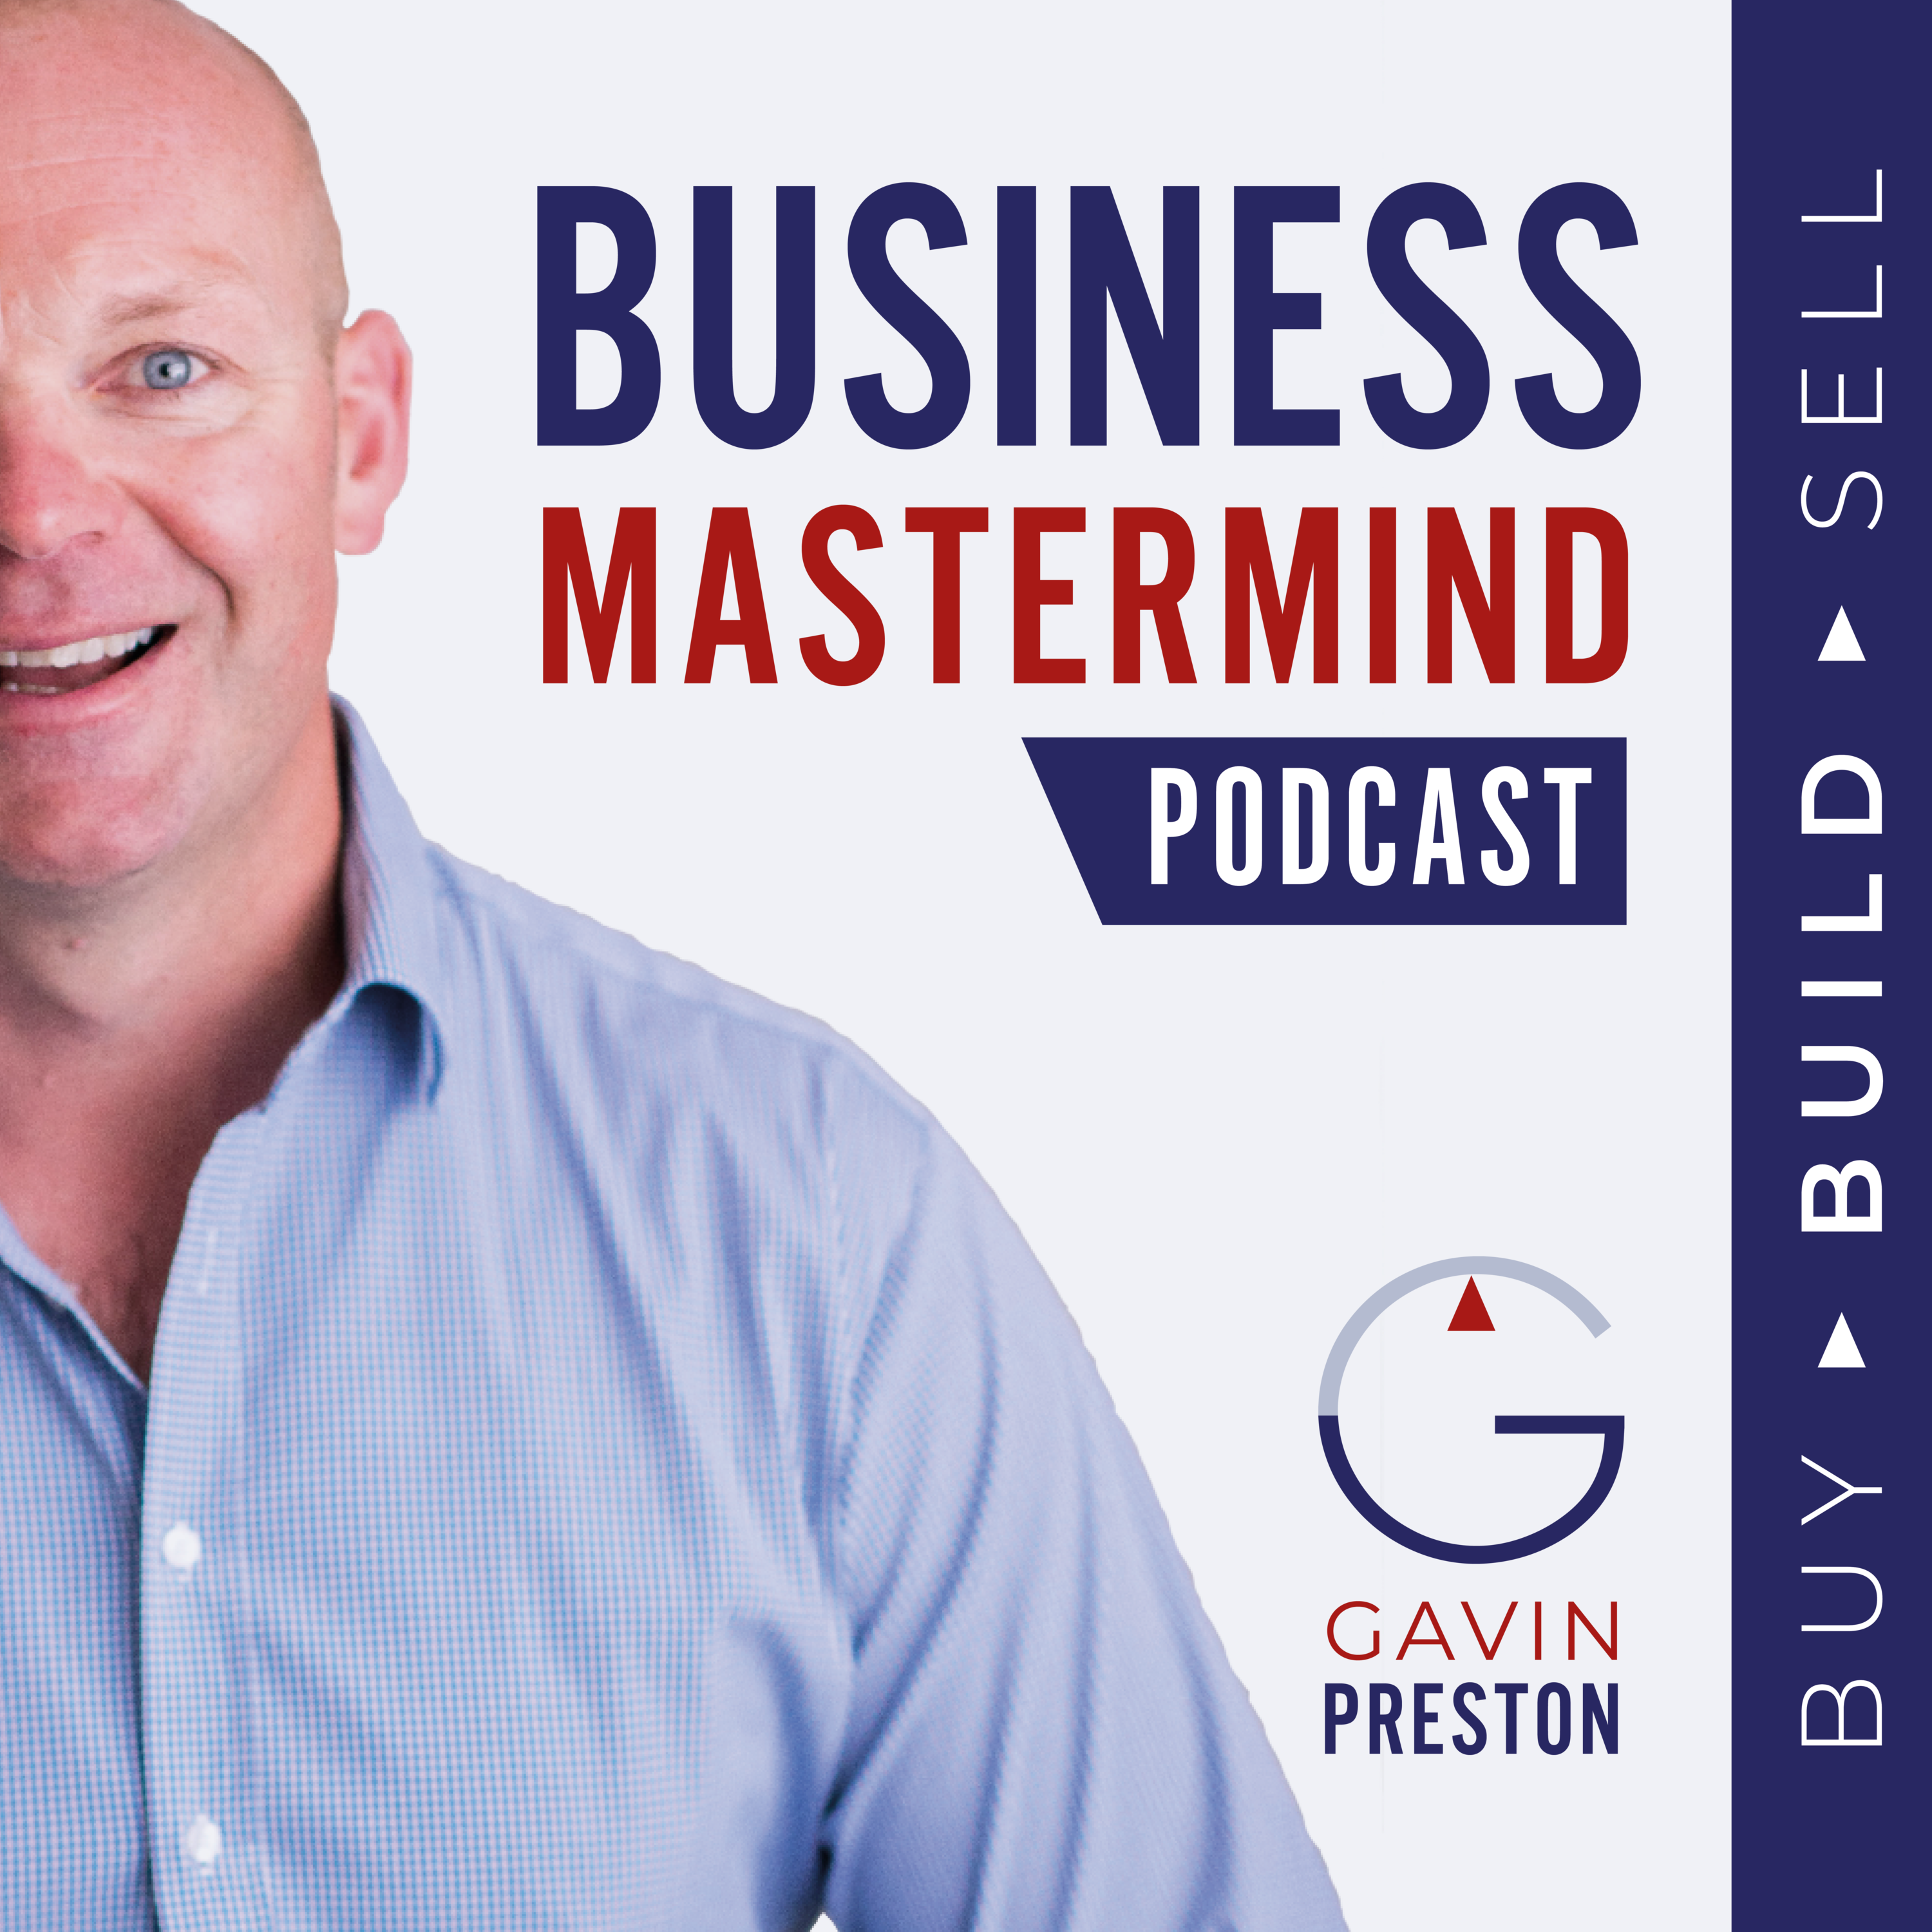 Making the Impossible Possible - Interview with Steve Sims CEO Founder of Bluefish